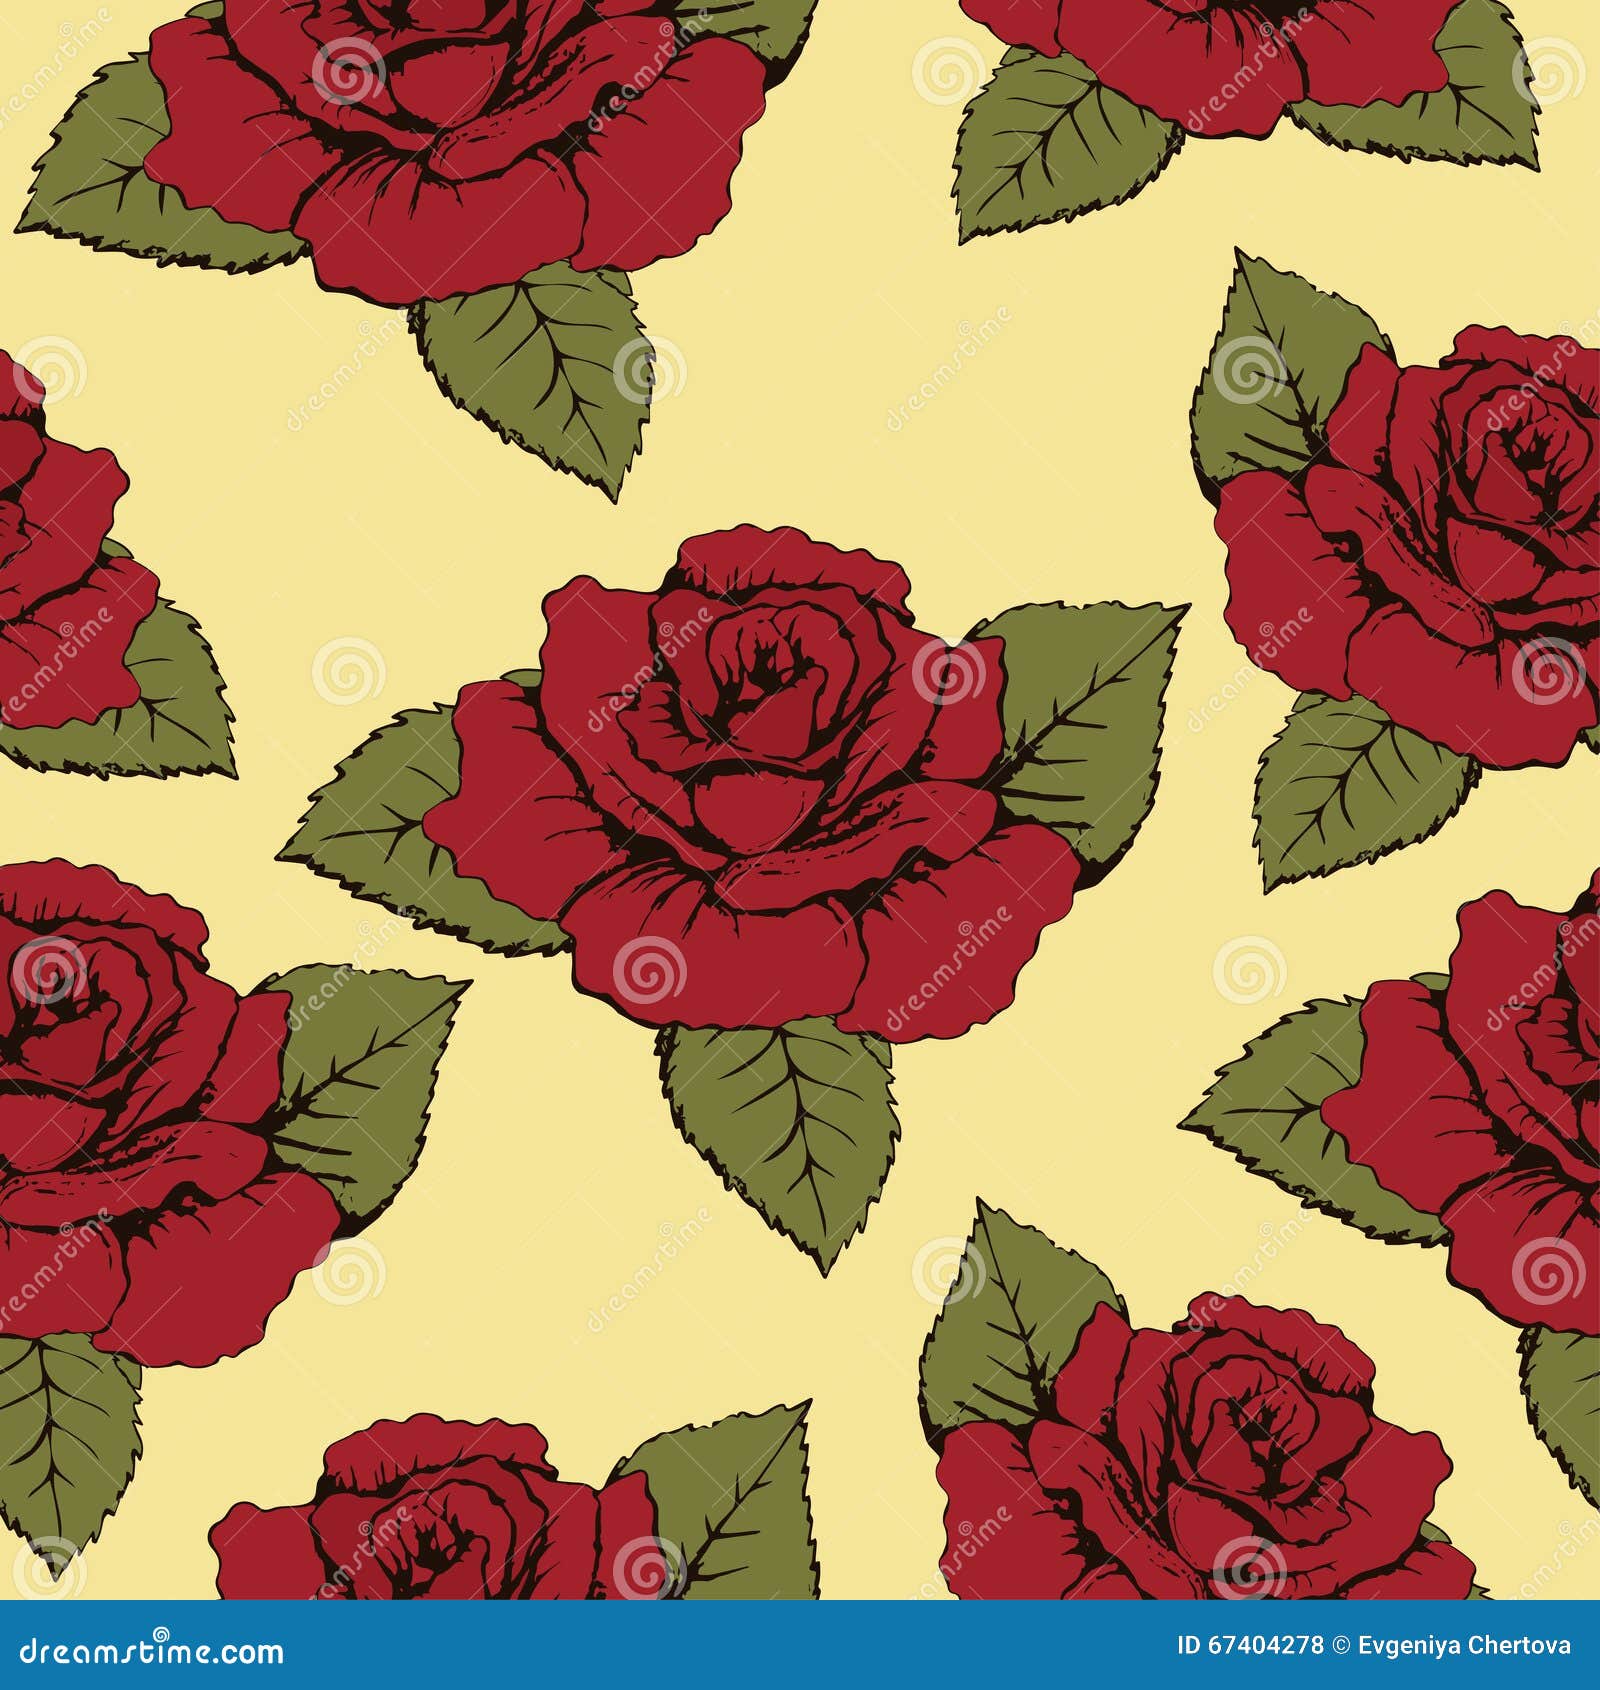 Seamless Pattern of Flowers Roses, Texture. Red Buds, Petals, Green ...